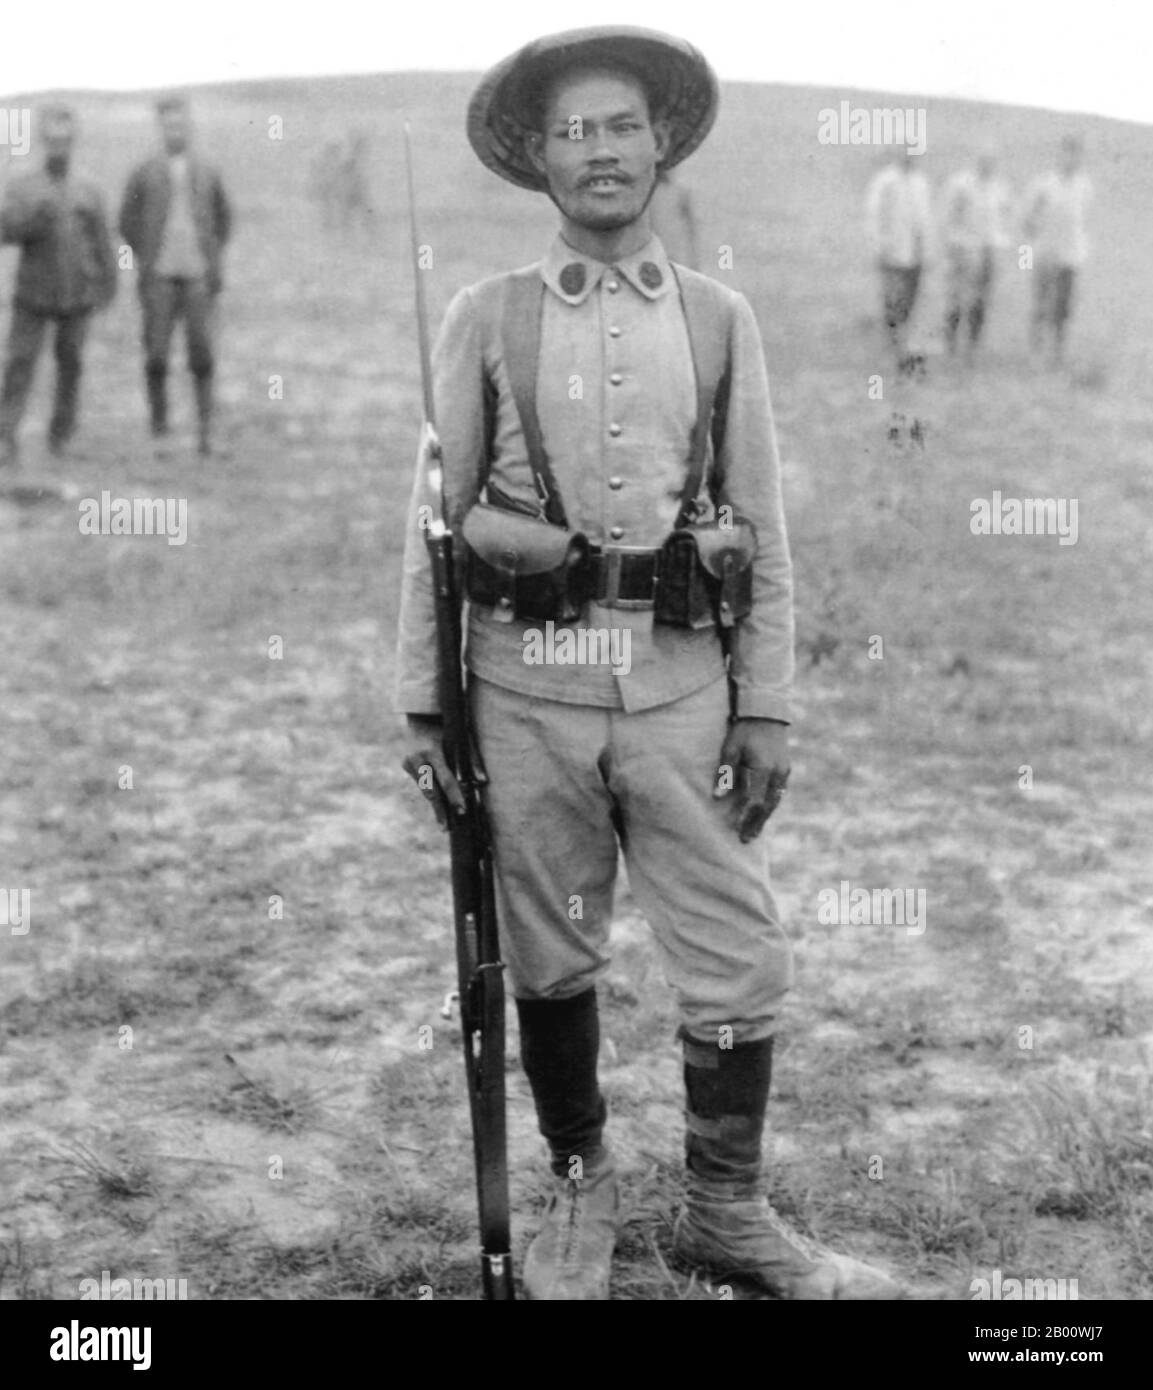 Vietnam: An Annamese 'tirailleur' or Vietnamese colonial soldier waiting to go into battle at Ypres, Belgium, in 1916.  Ypres occupied a strategic position during World War I because it stood in the path of Germany's planned sweep across the rest of Belgium and into France. In the Second Battle of Ypres (22 April to 25 May 1915), the Germans used poison gas for the first time on the Western Front (they had used it earlier at the Battle of Bolimov on 3 January 1915) and captured high ground east of the town. The first gas attack occurred against Canadian, British, and French soldiers. Stock Photo